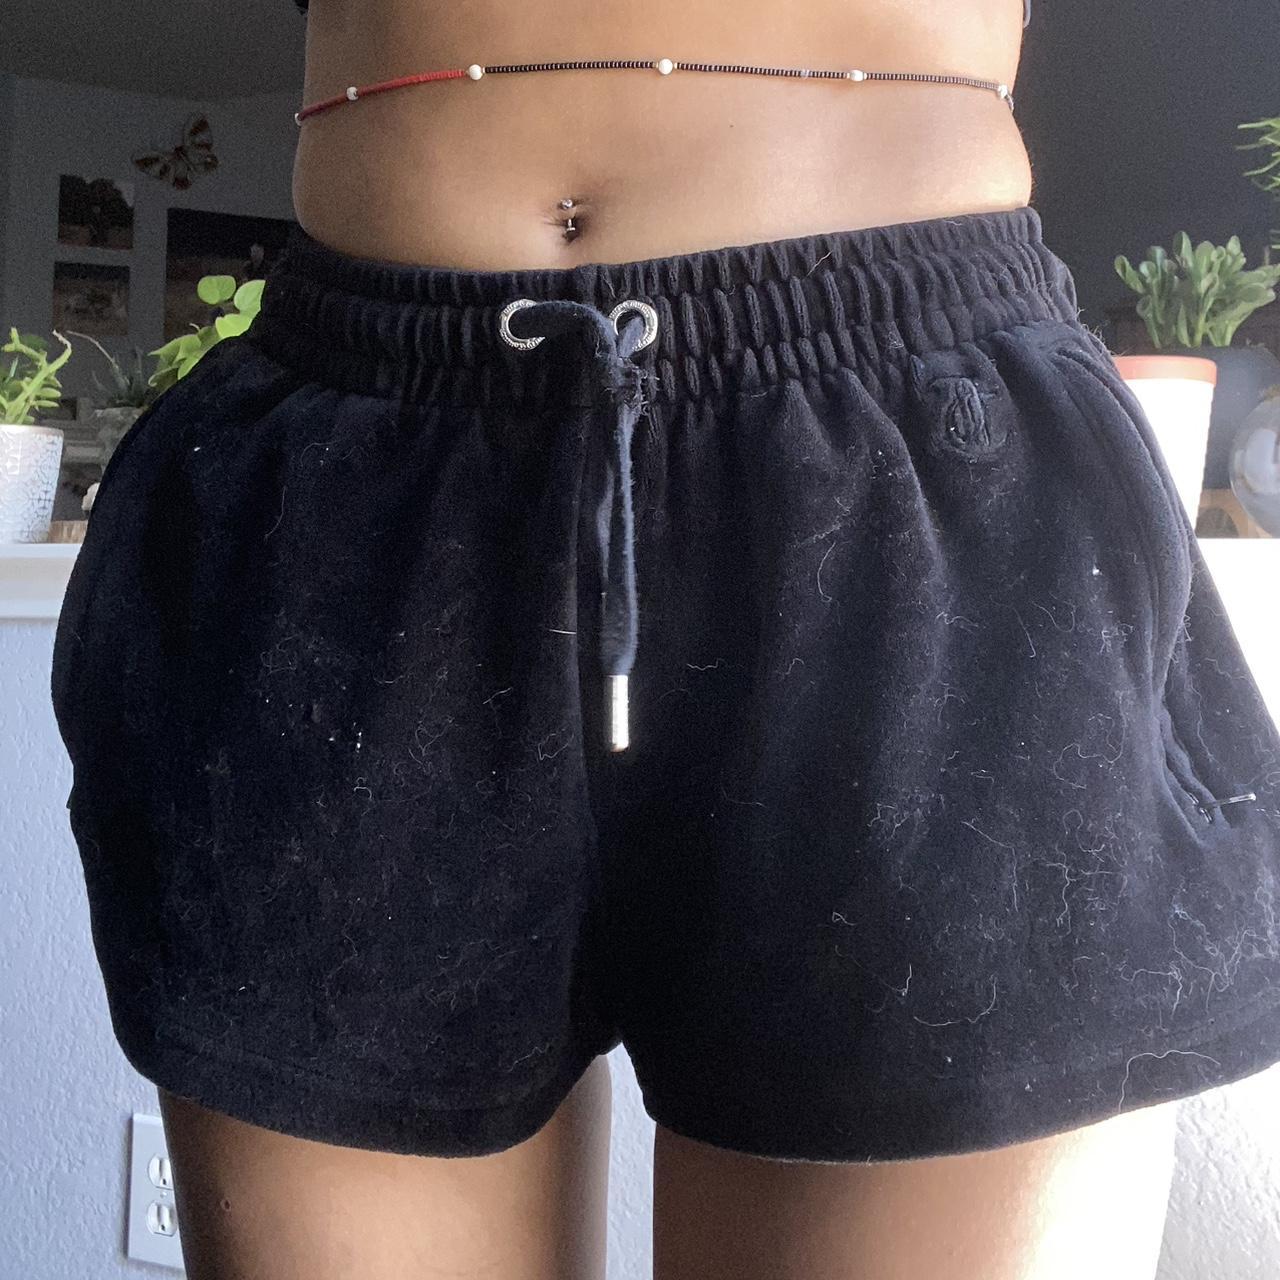 Juicy Couture Velour Butt Bling Shorts ., ., ., OPEN TO